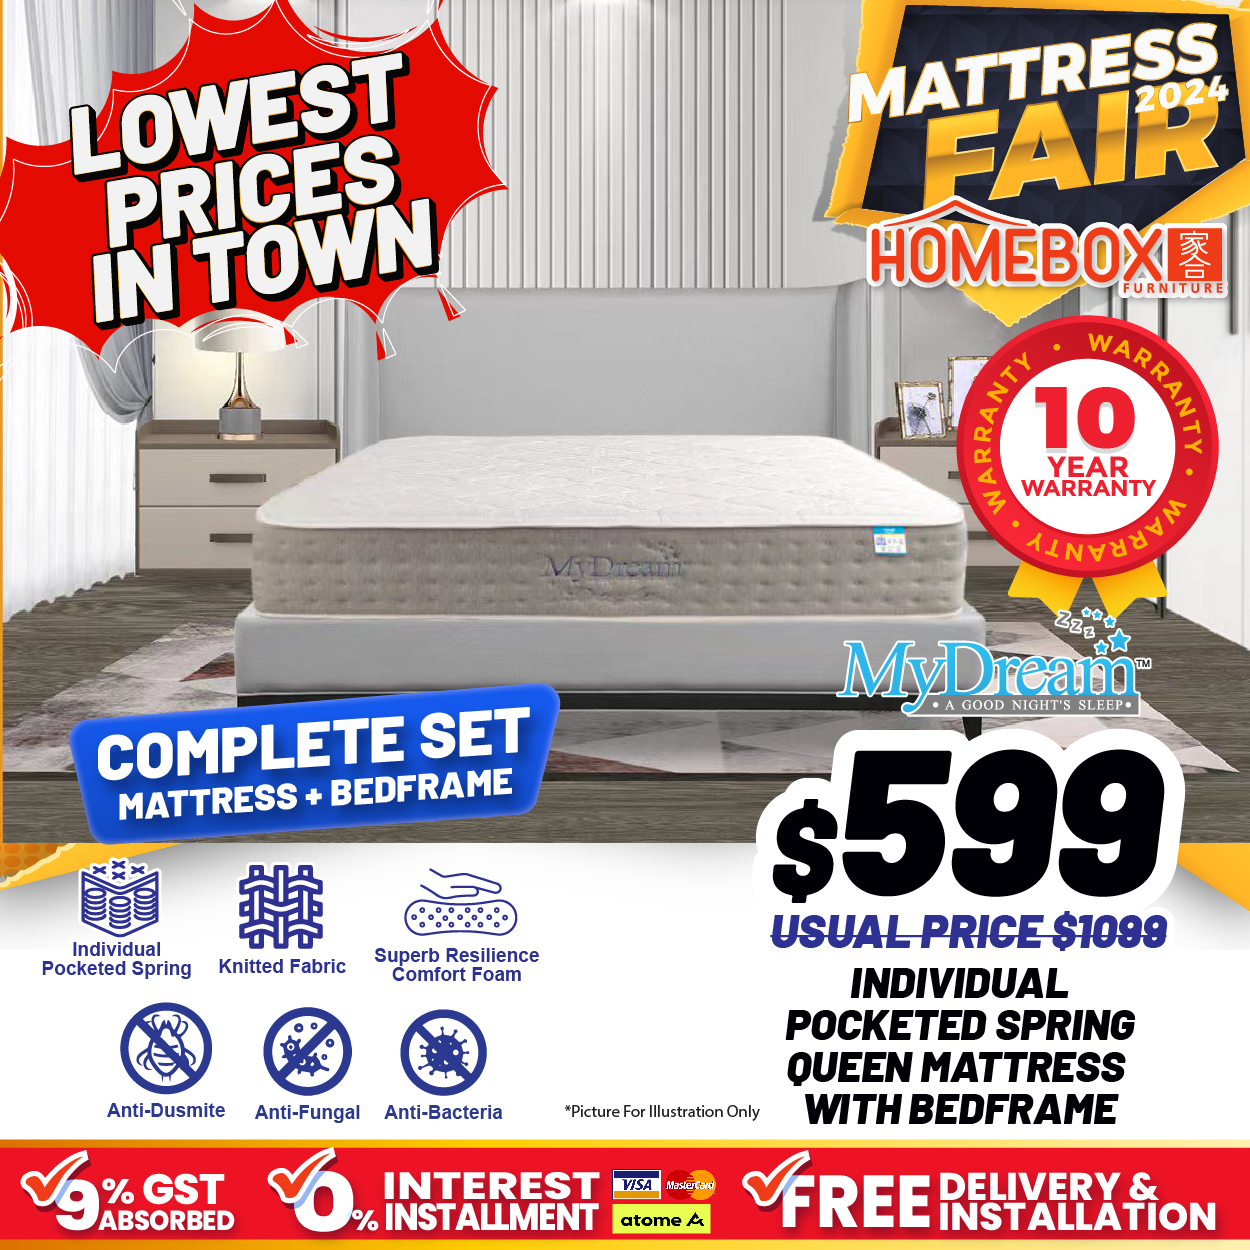 Lobang: Homebox's Biggest Mattress Fair in Aljunied Has Everything At Up To 80% Off From Now Till 5 May 24. Get A Free Mattres Upgrade During The Sale! - 9